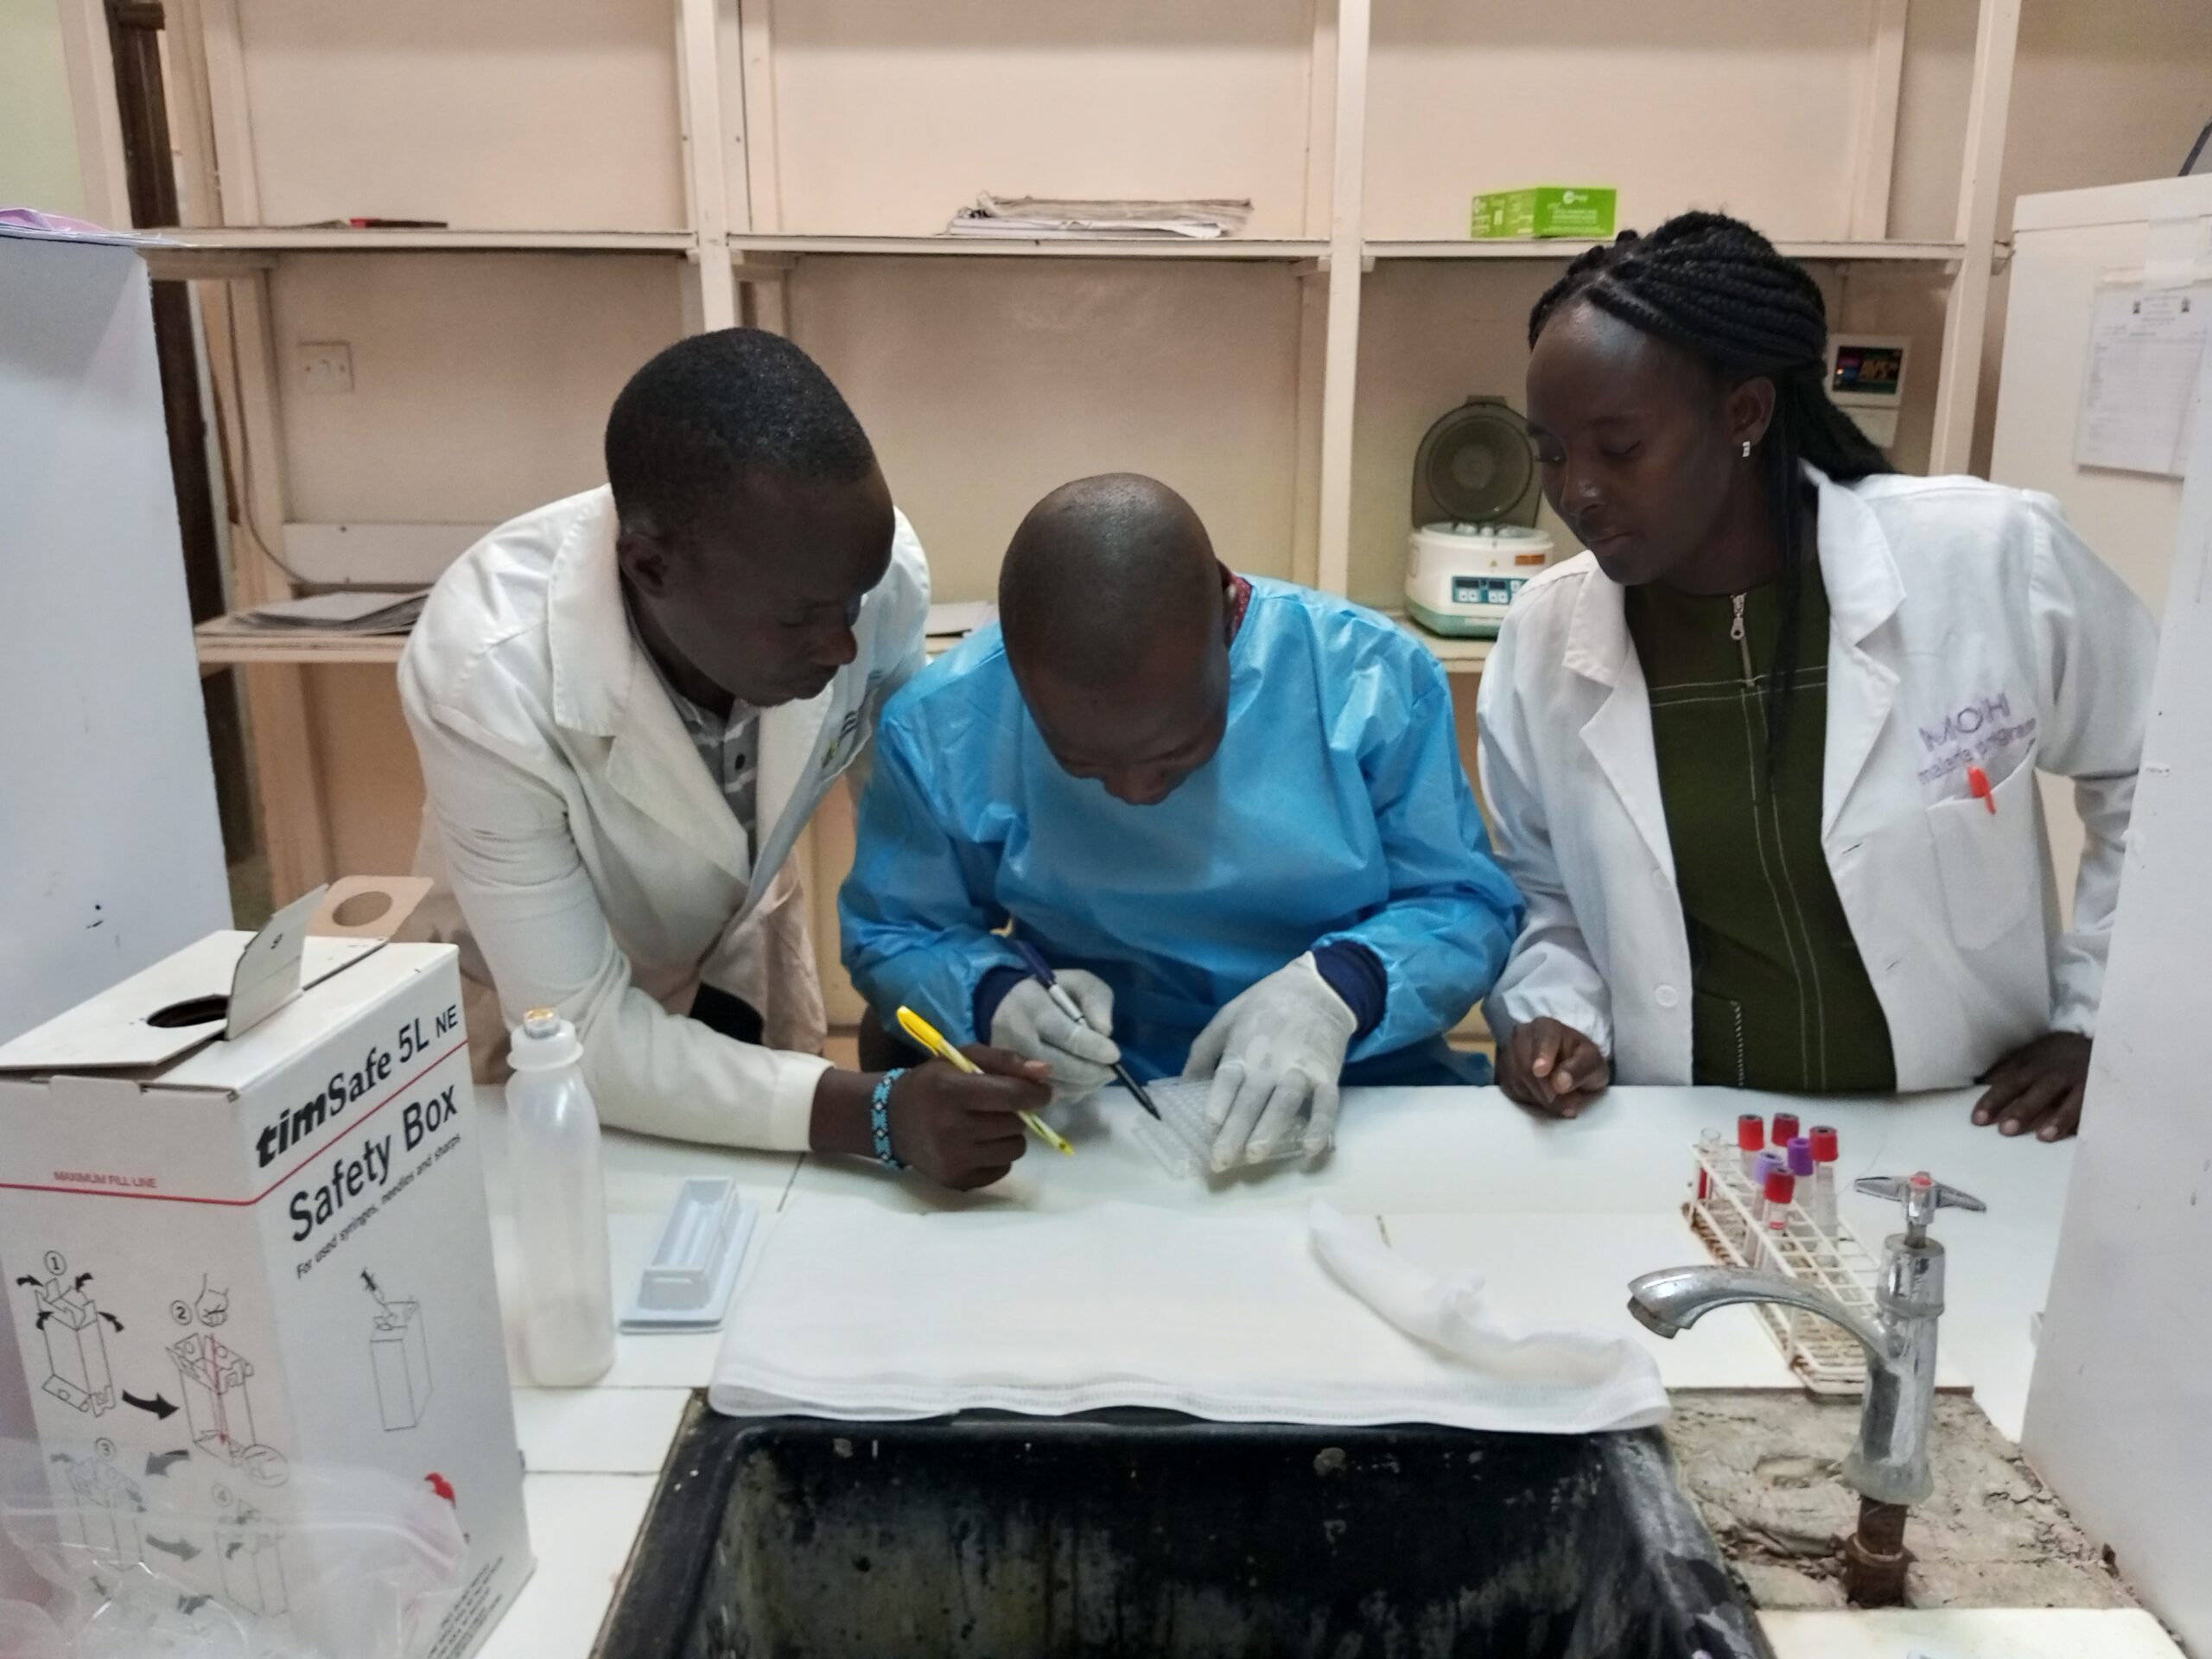 Three African scientists wearing lab coats and gloves, working at a lab bench